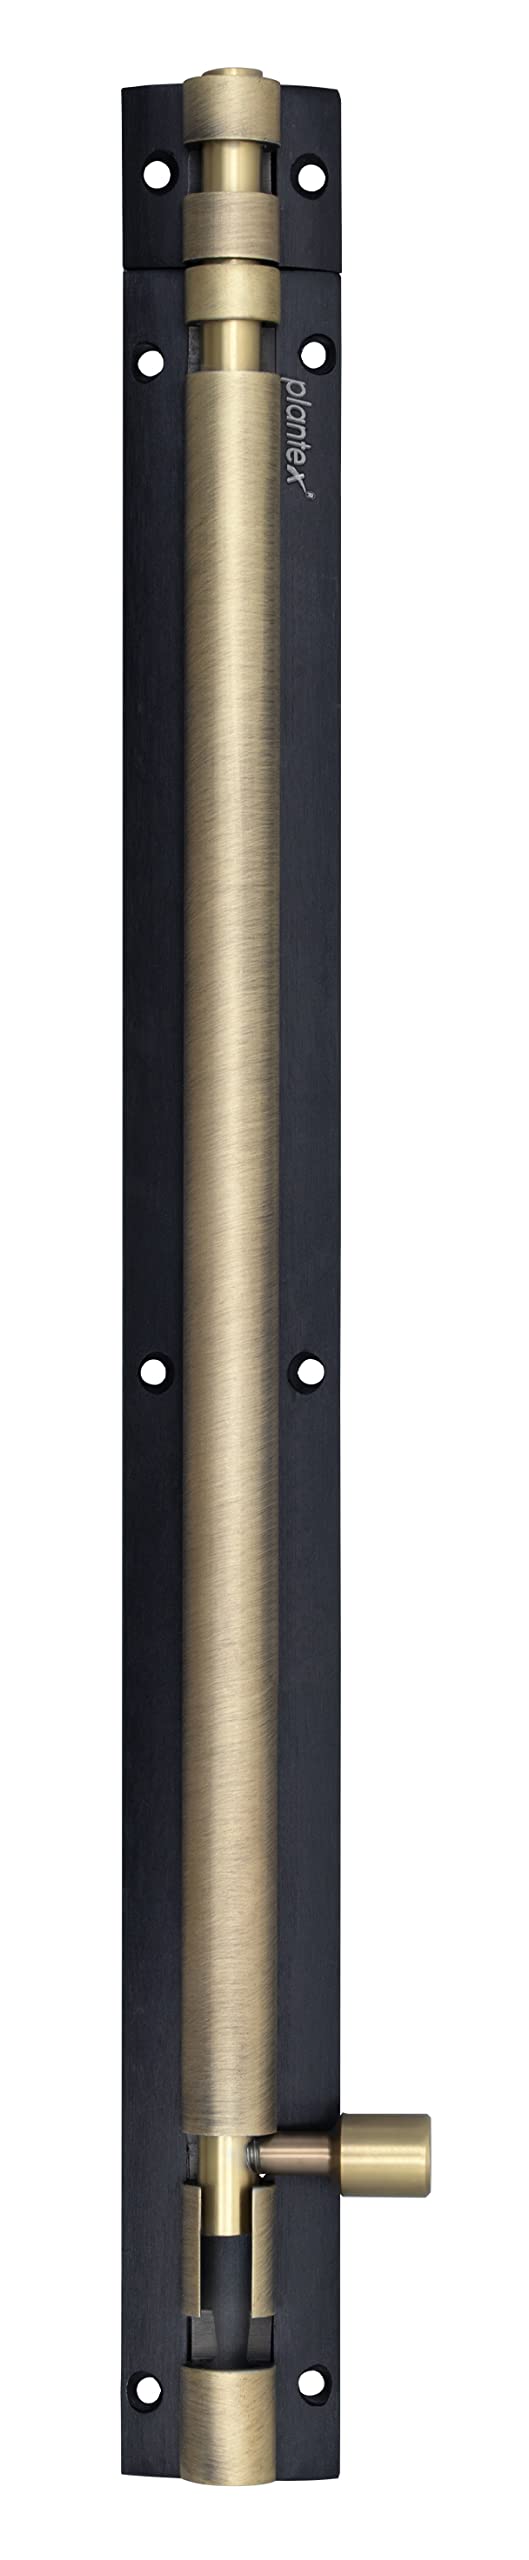 Plantex 12- inch Tower Bolt for Closing and Locking Door and Windows - Multicolour (Pack of 1)